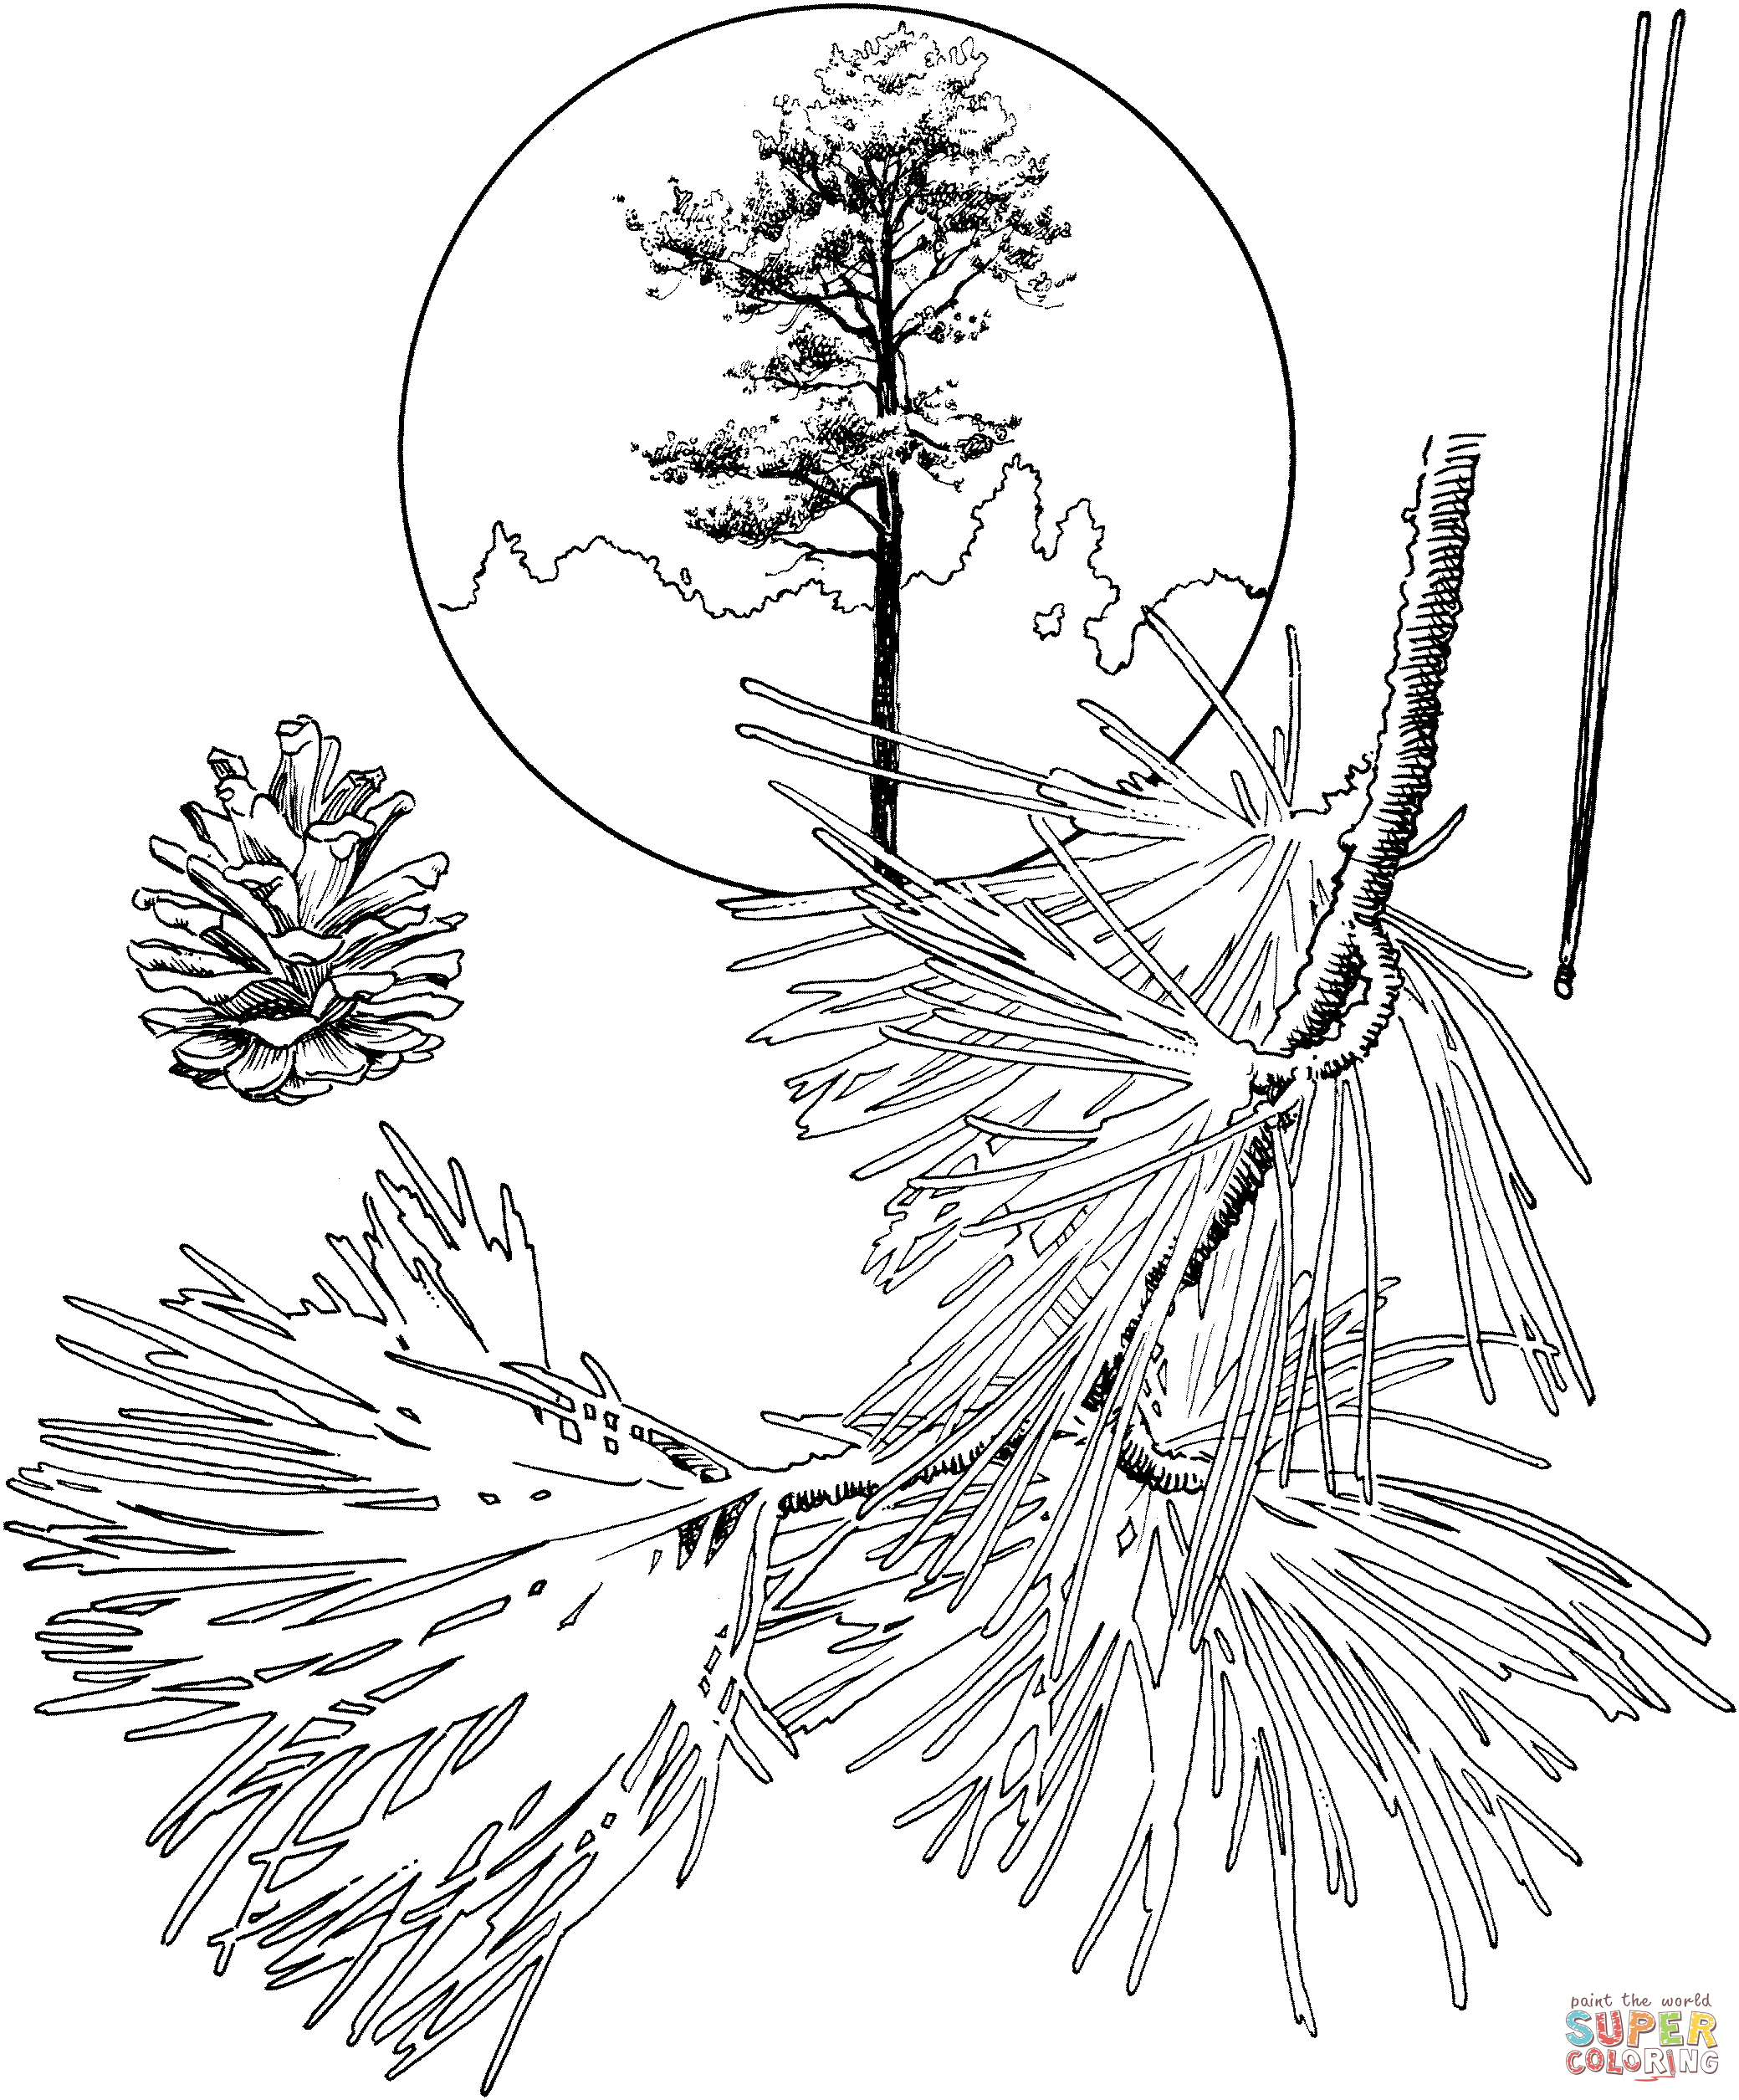 Pine trees coloring pages | Free Coloring Pages